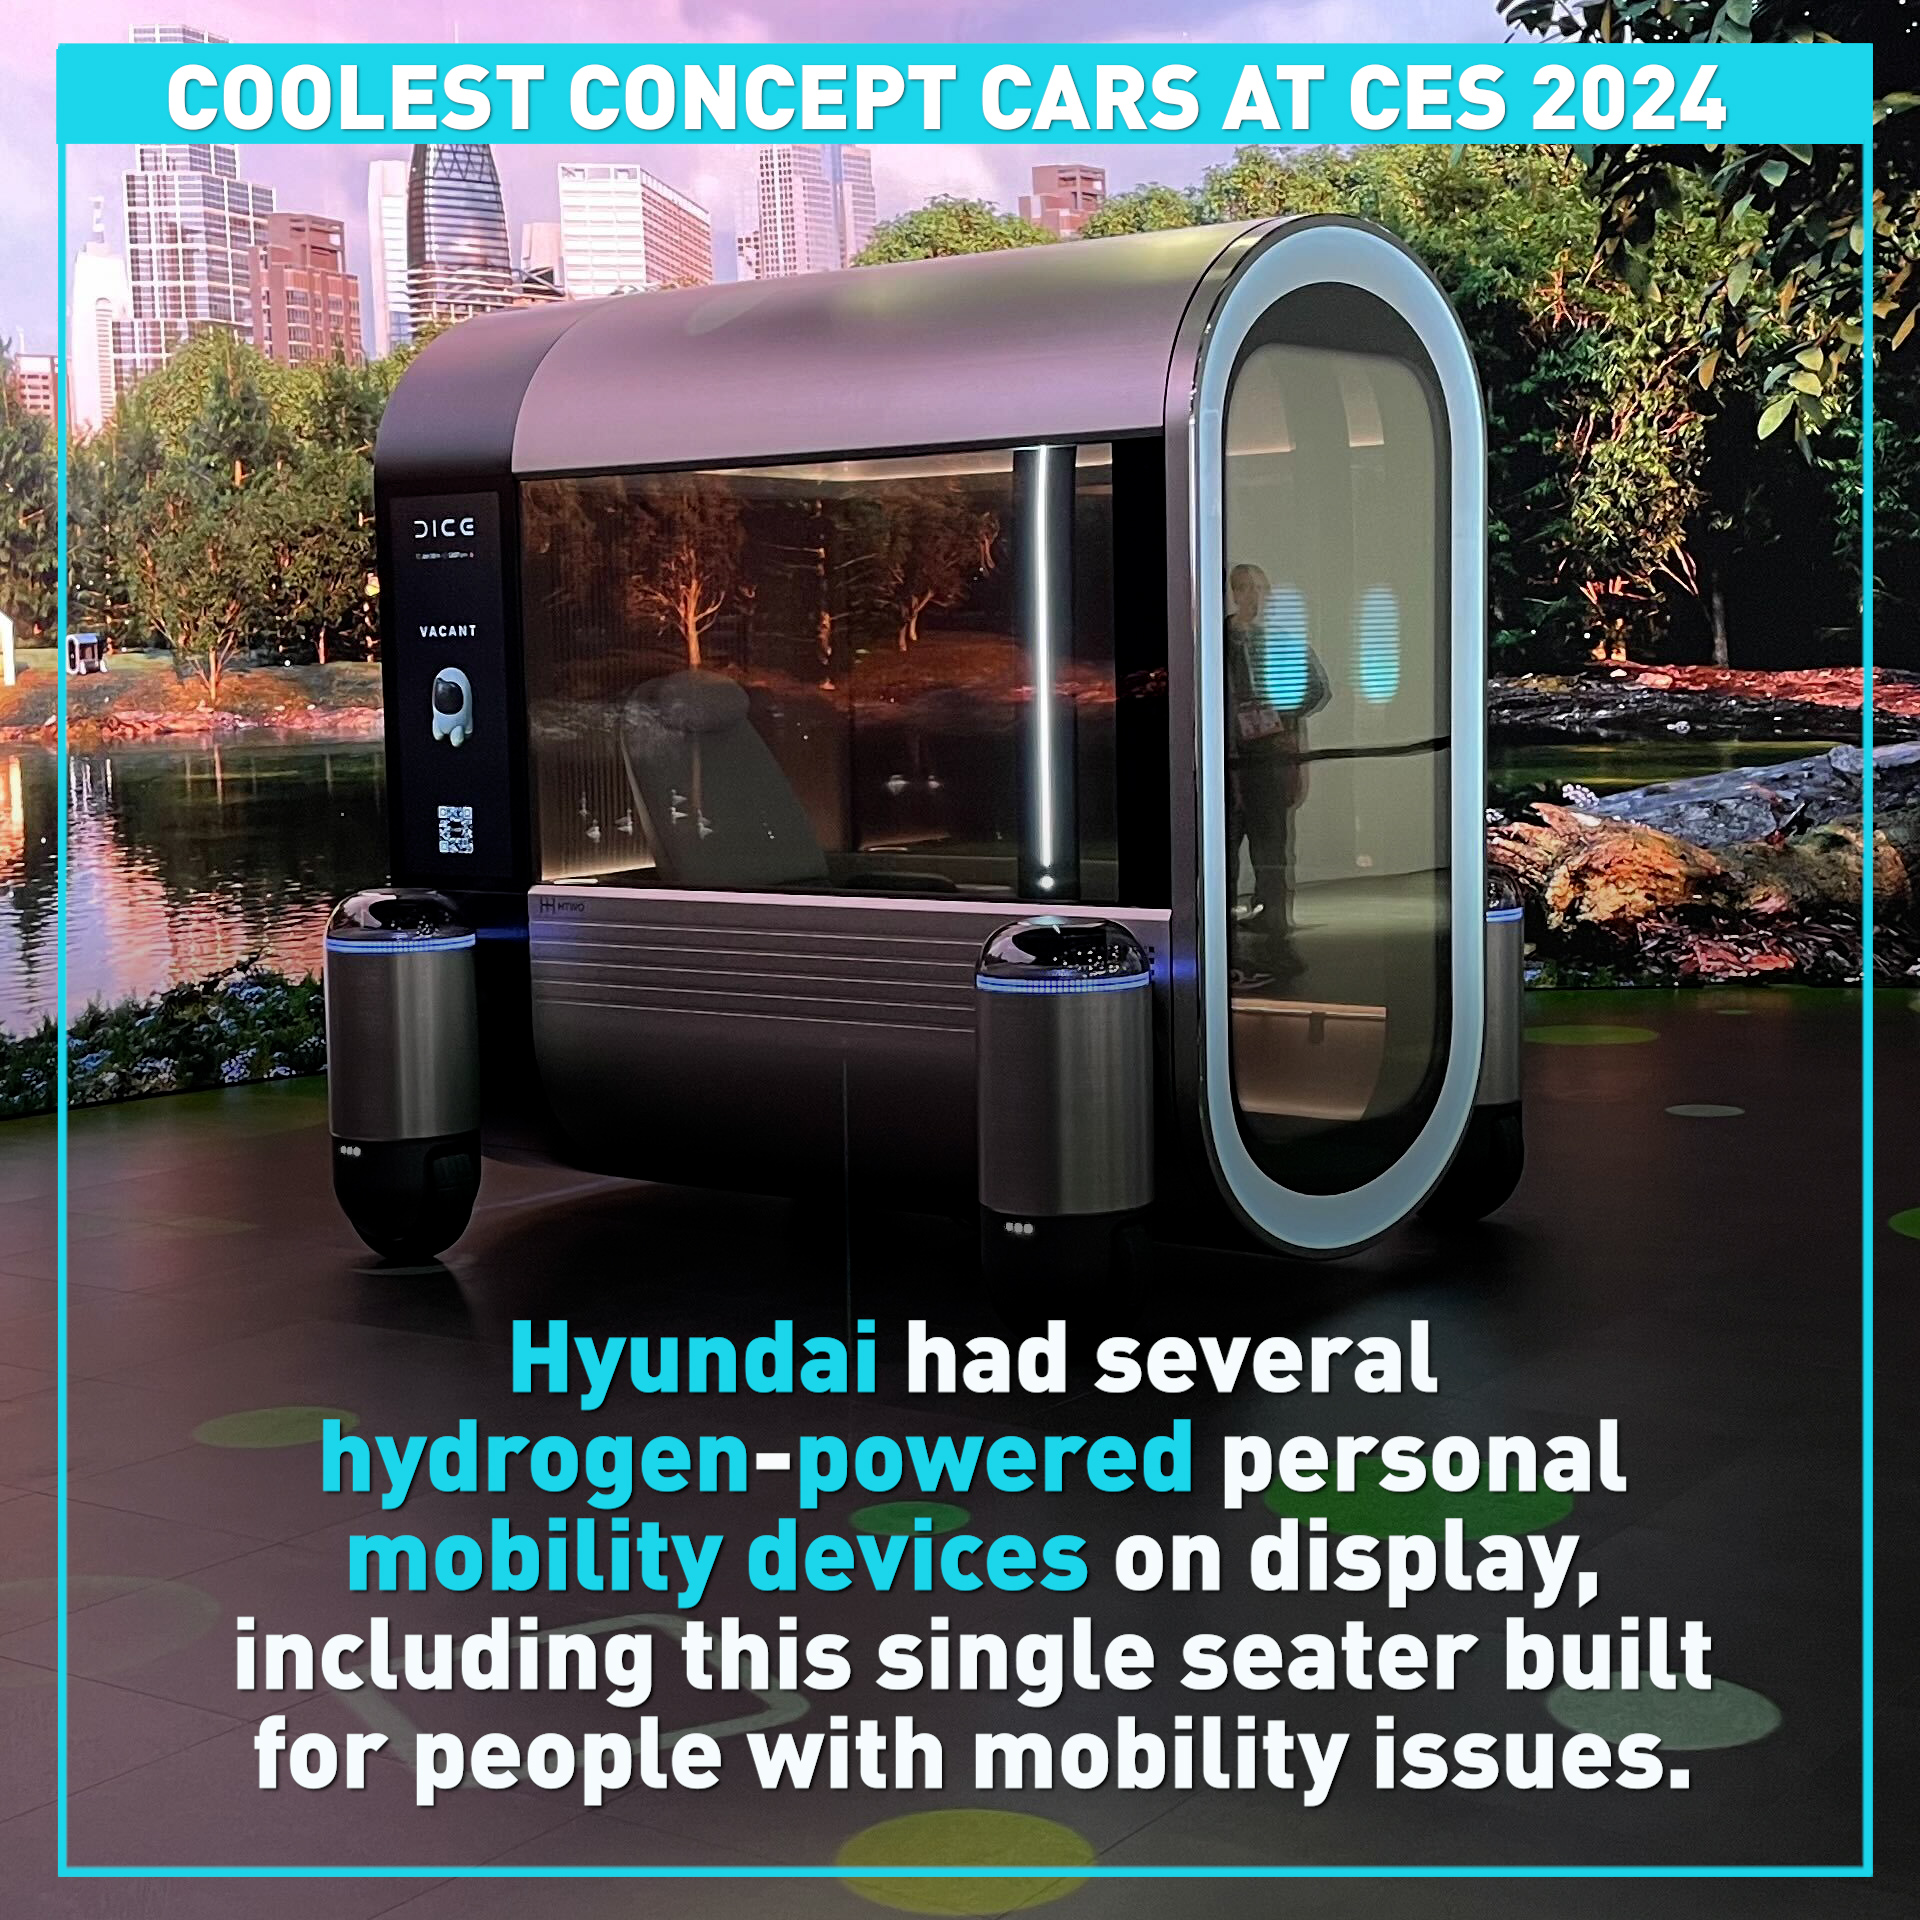 Coolest concept vehicles at this year's CES 